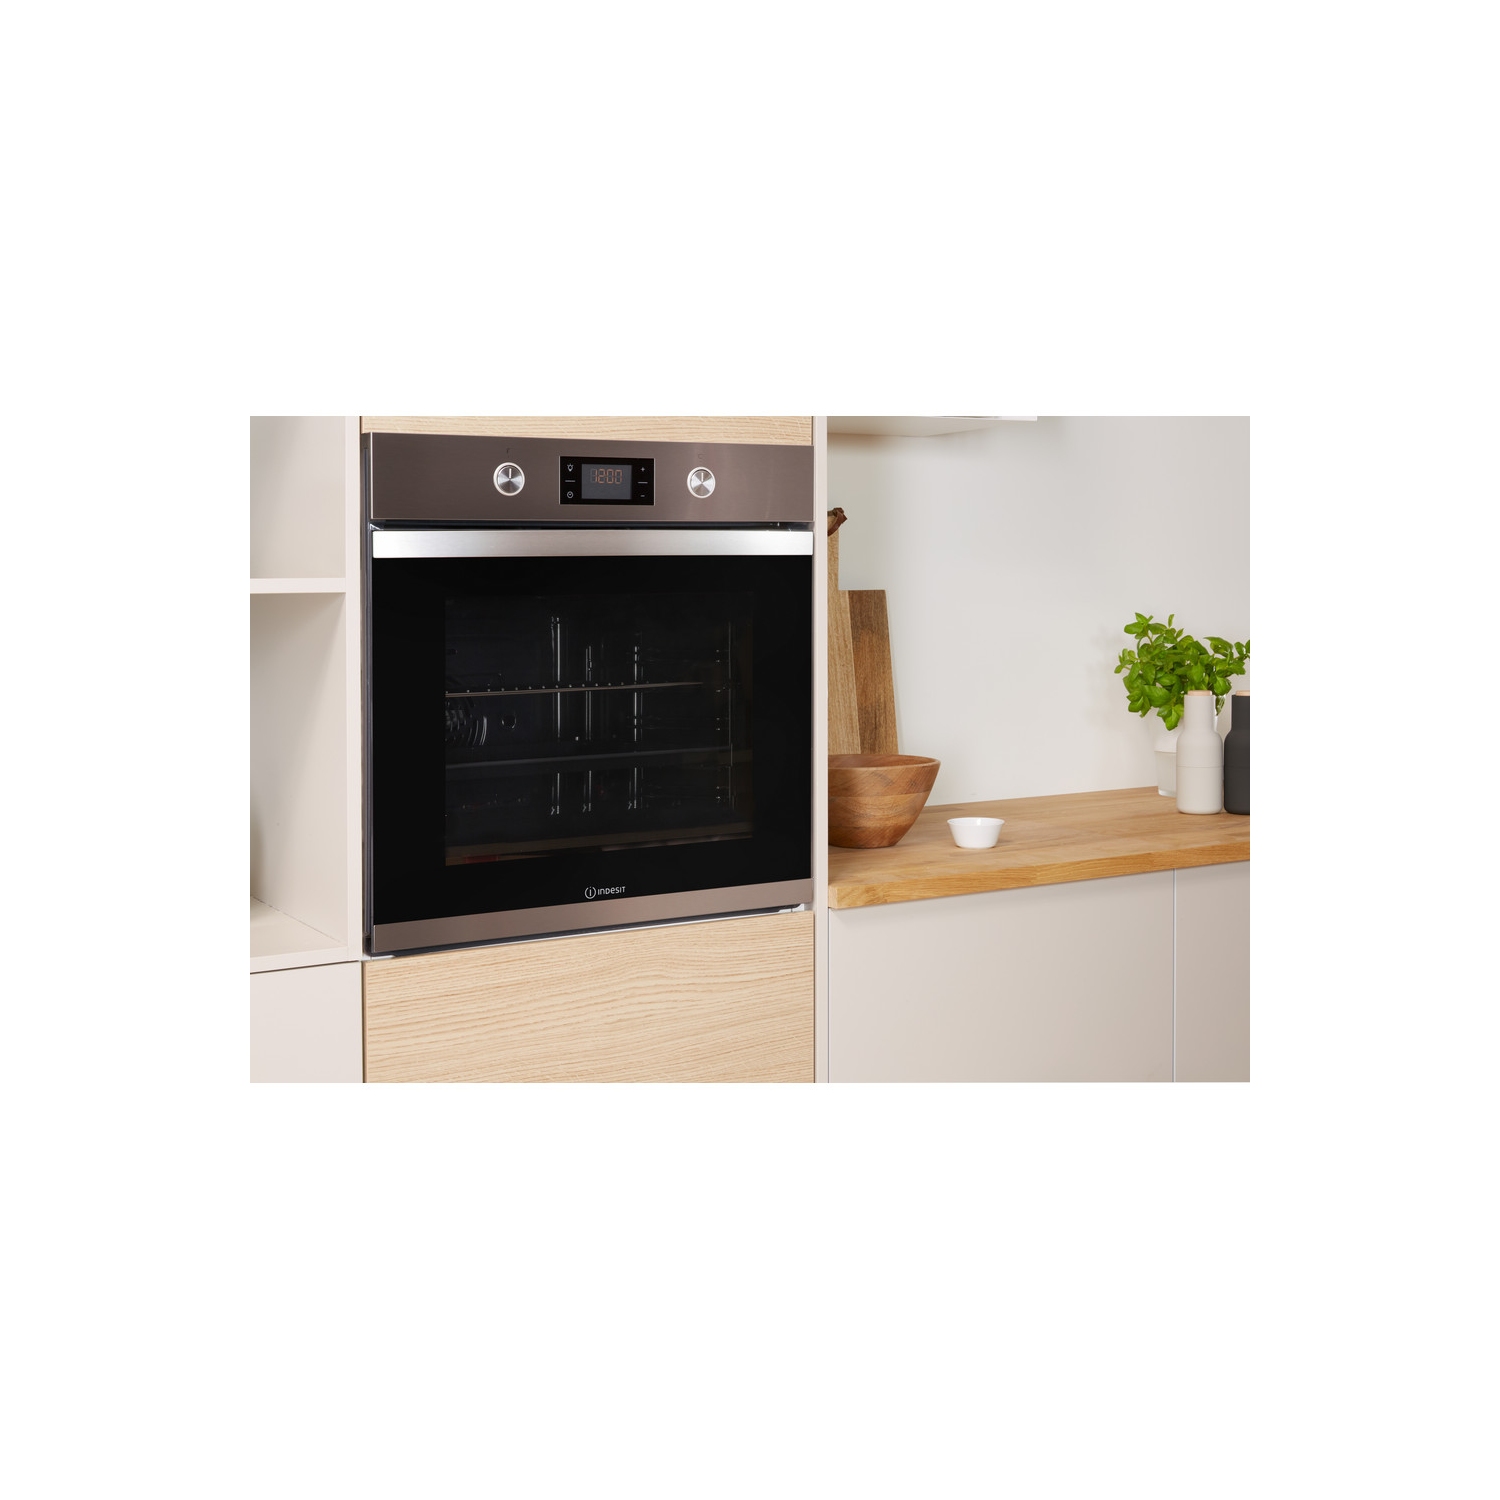 Indesit Built In Electric Single Oven - Stainless Steel - A+ Rated - 14